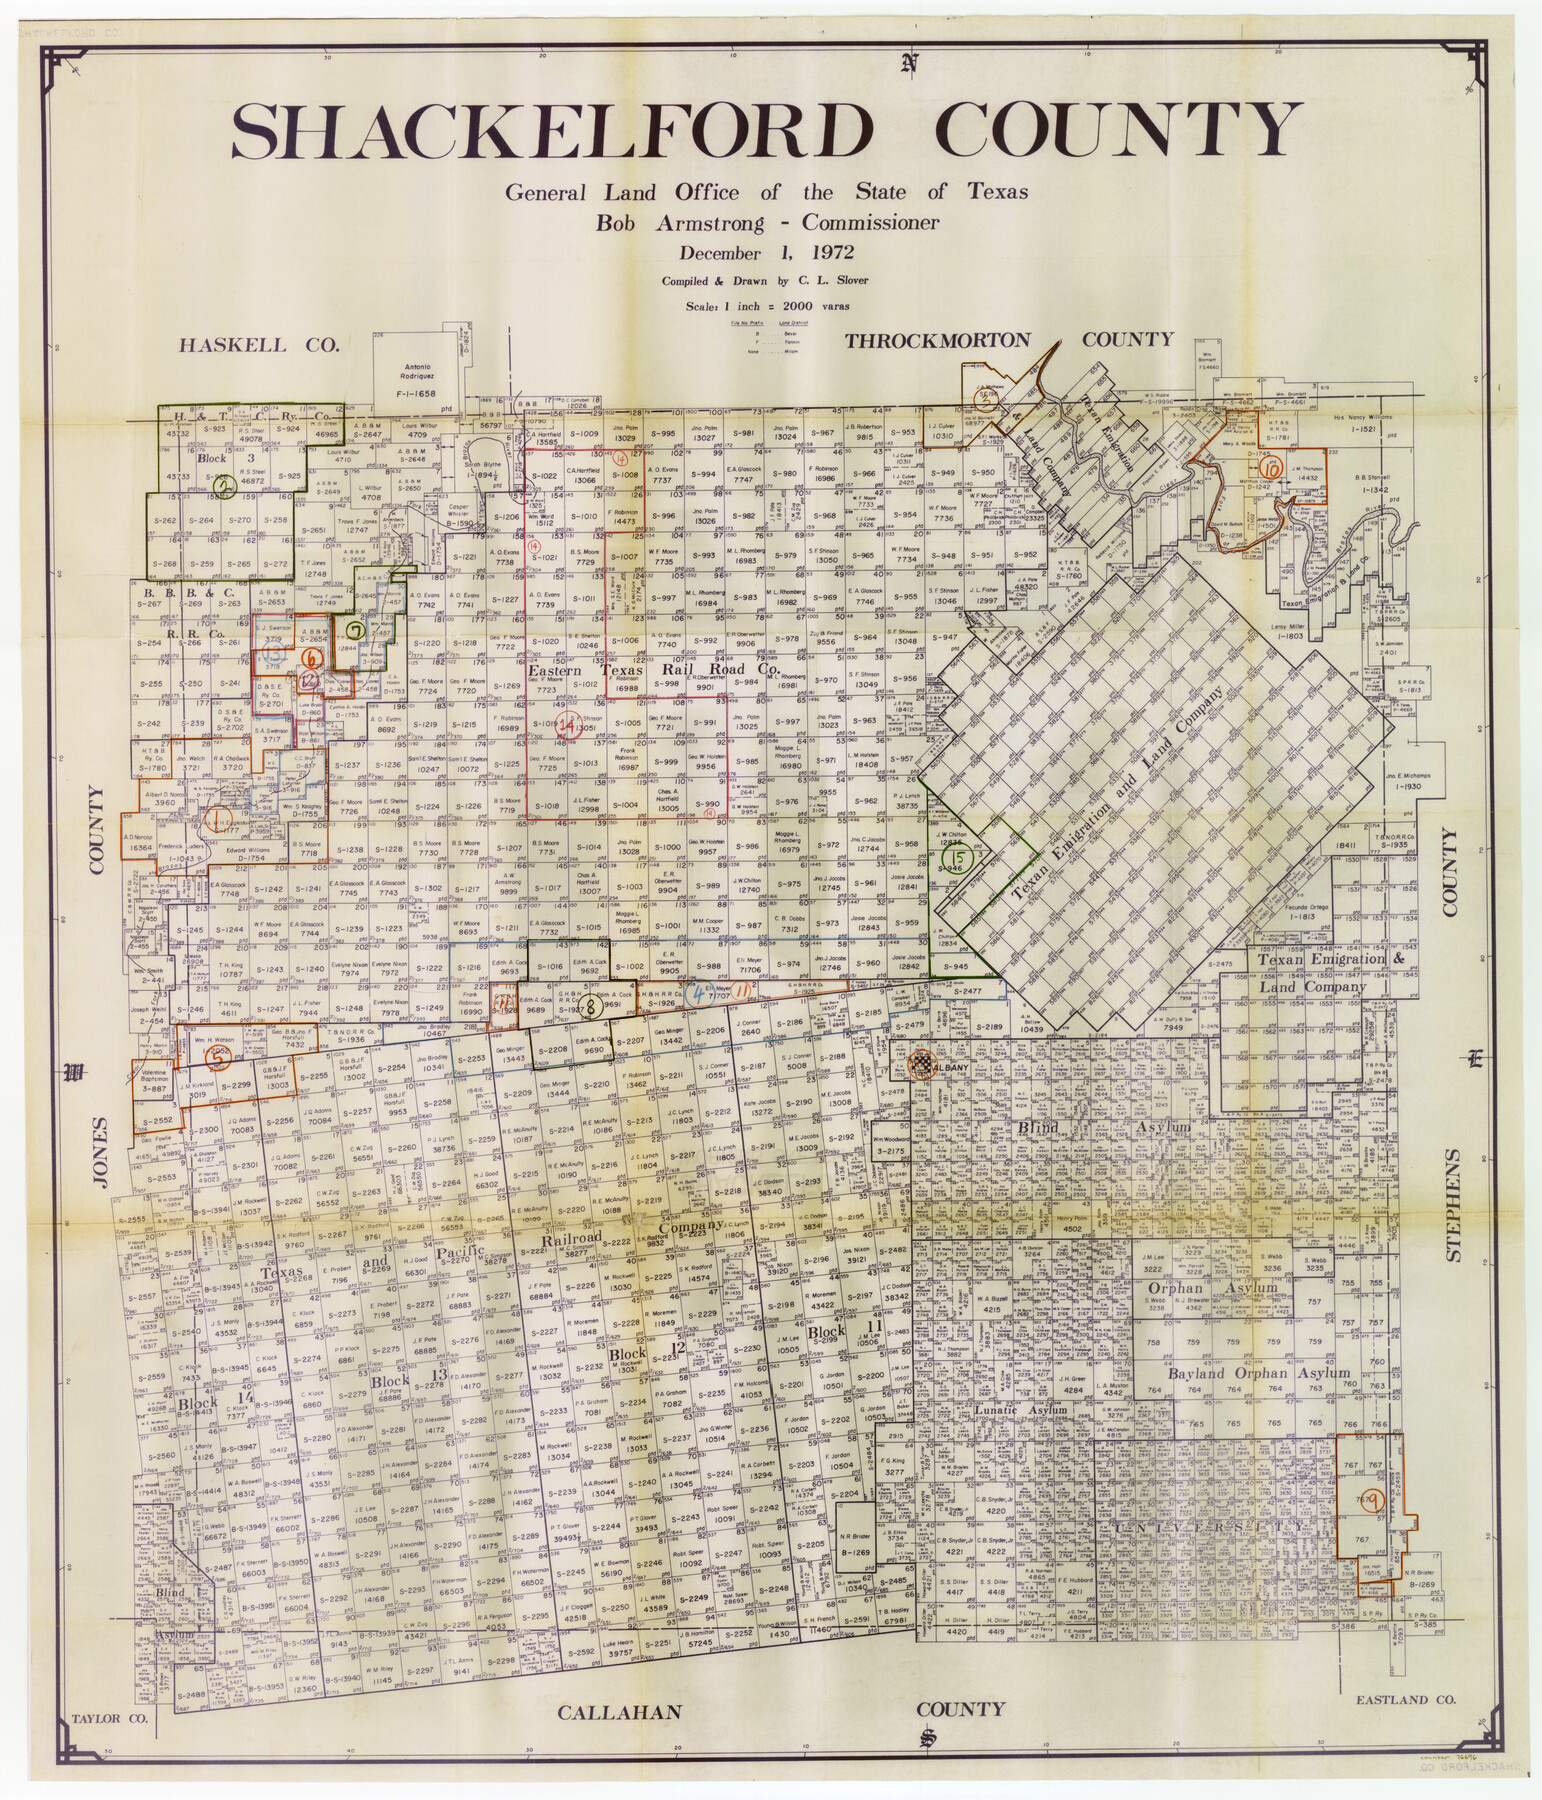 76696, Shackelford County Working Sketch Graphic Index, General Map Collection